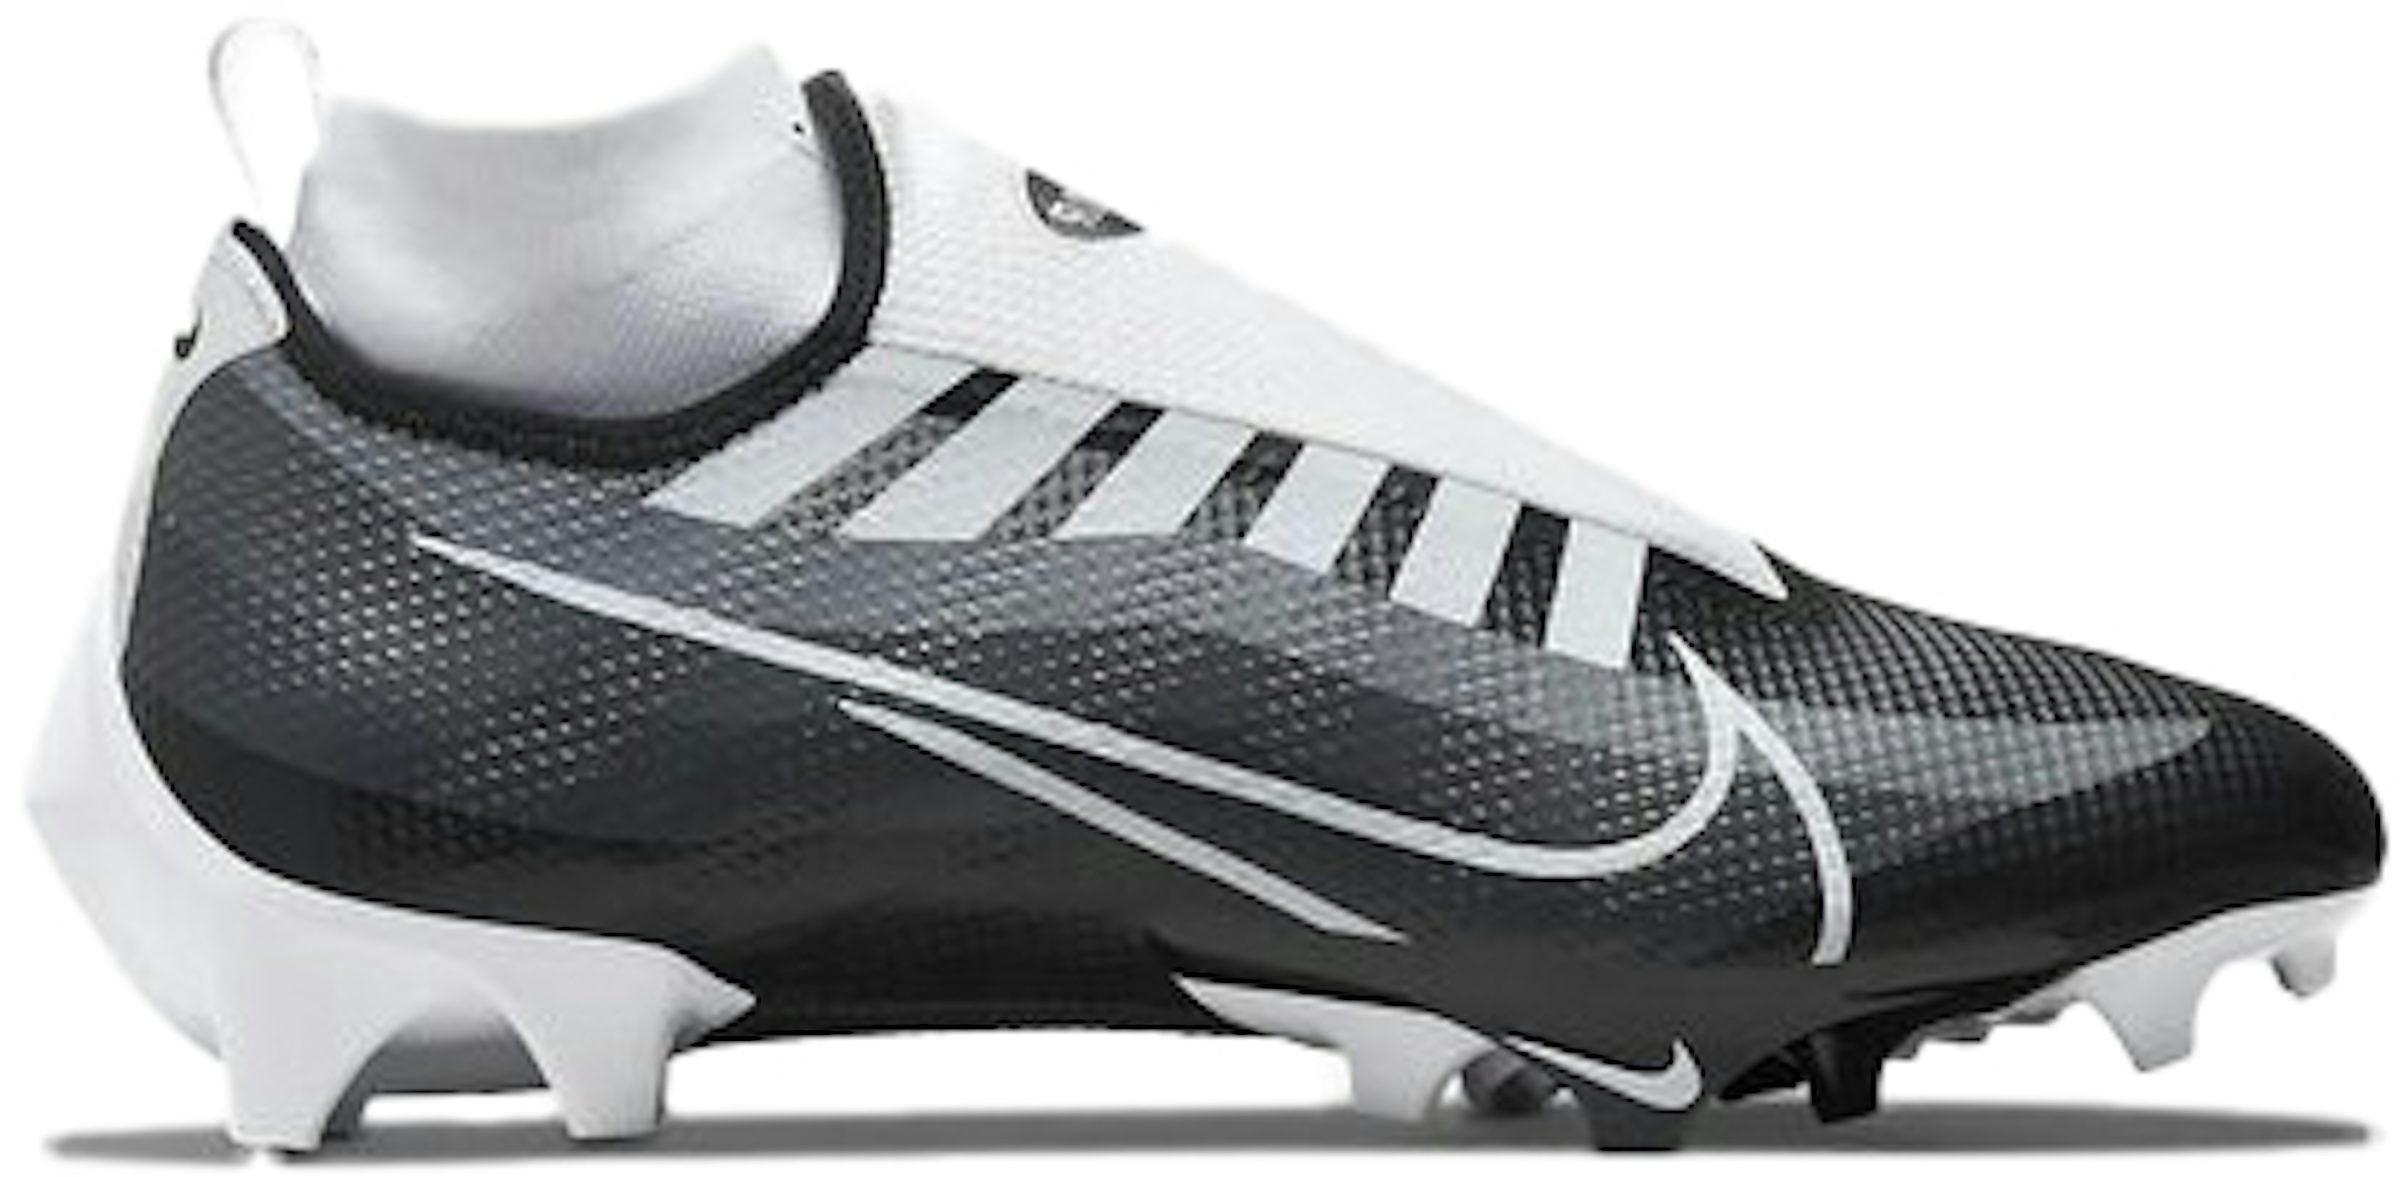 Soccer Boots Shoes Cleats Sneakers Leather Black White Anthracite